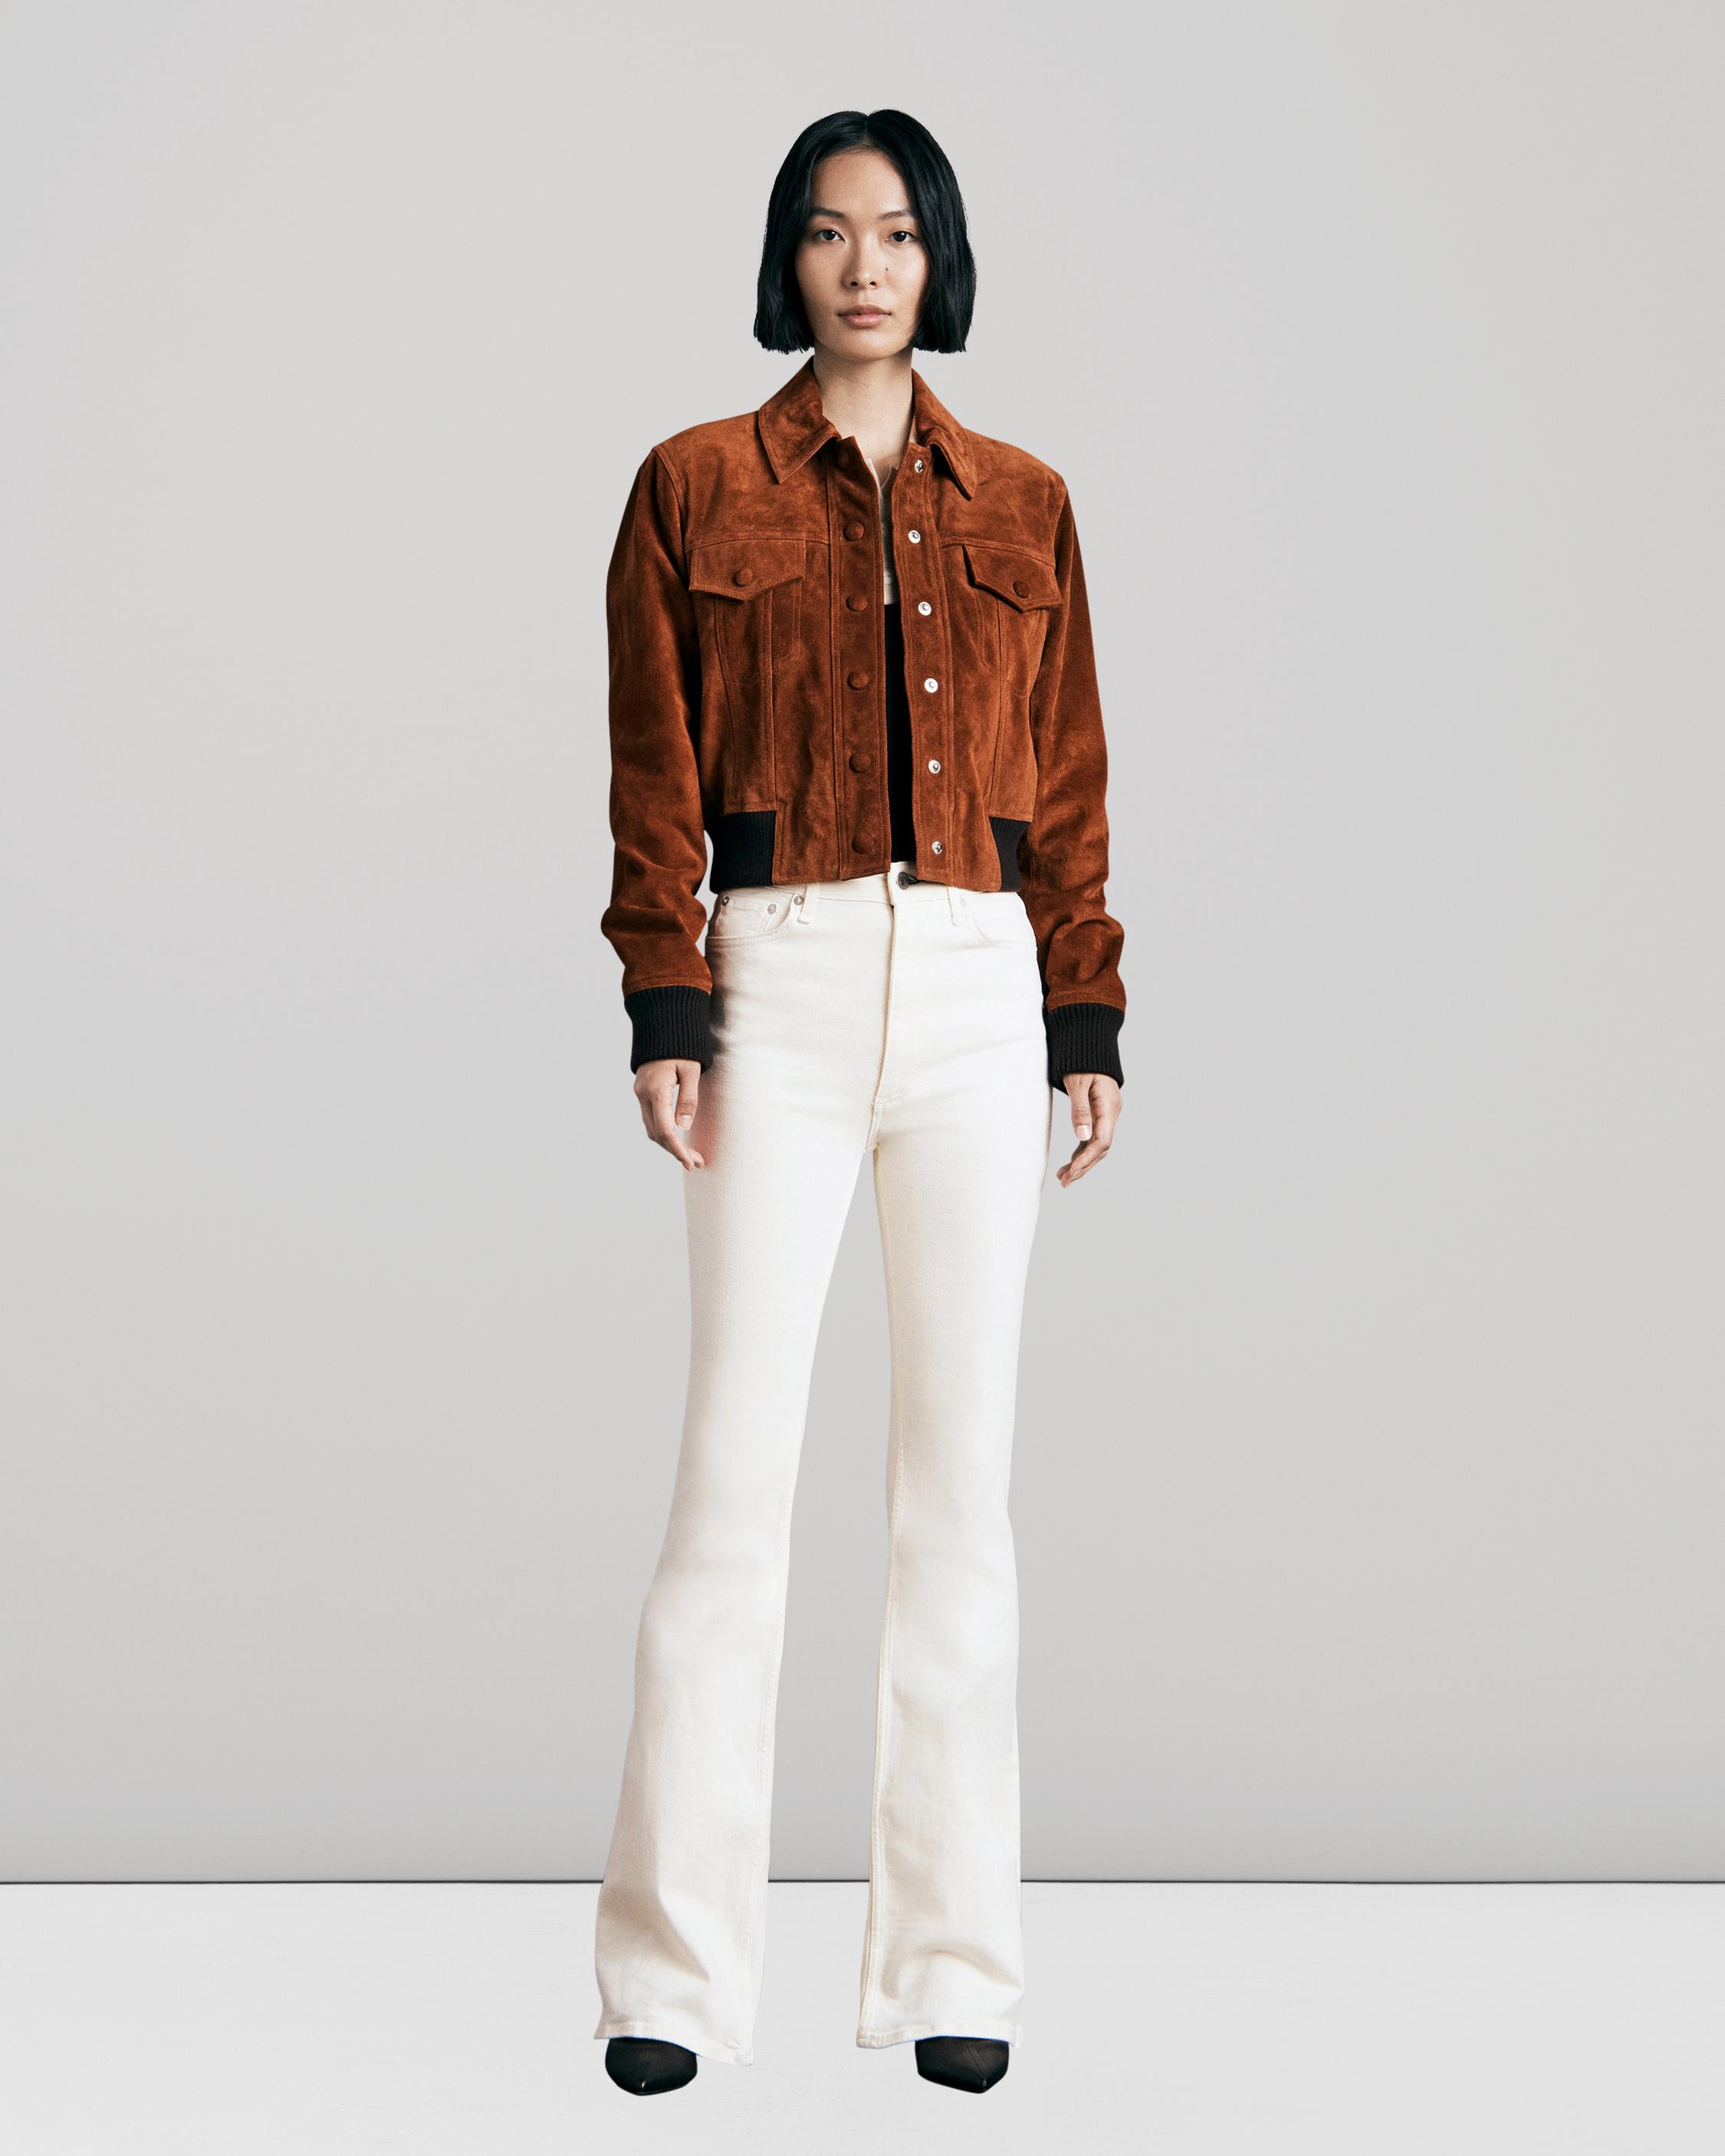 Straight-Leg High-Rise Pant - The Iconic (R) - Tall, Tall